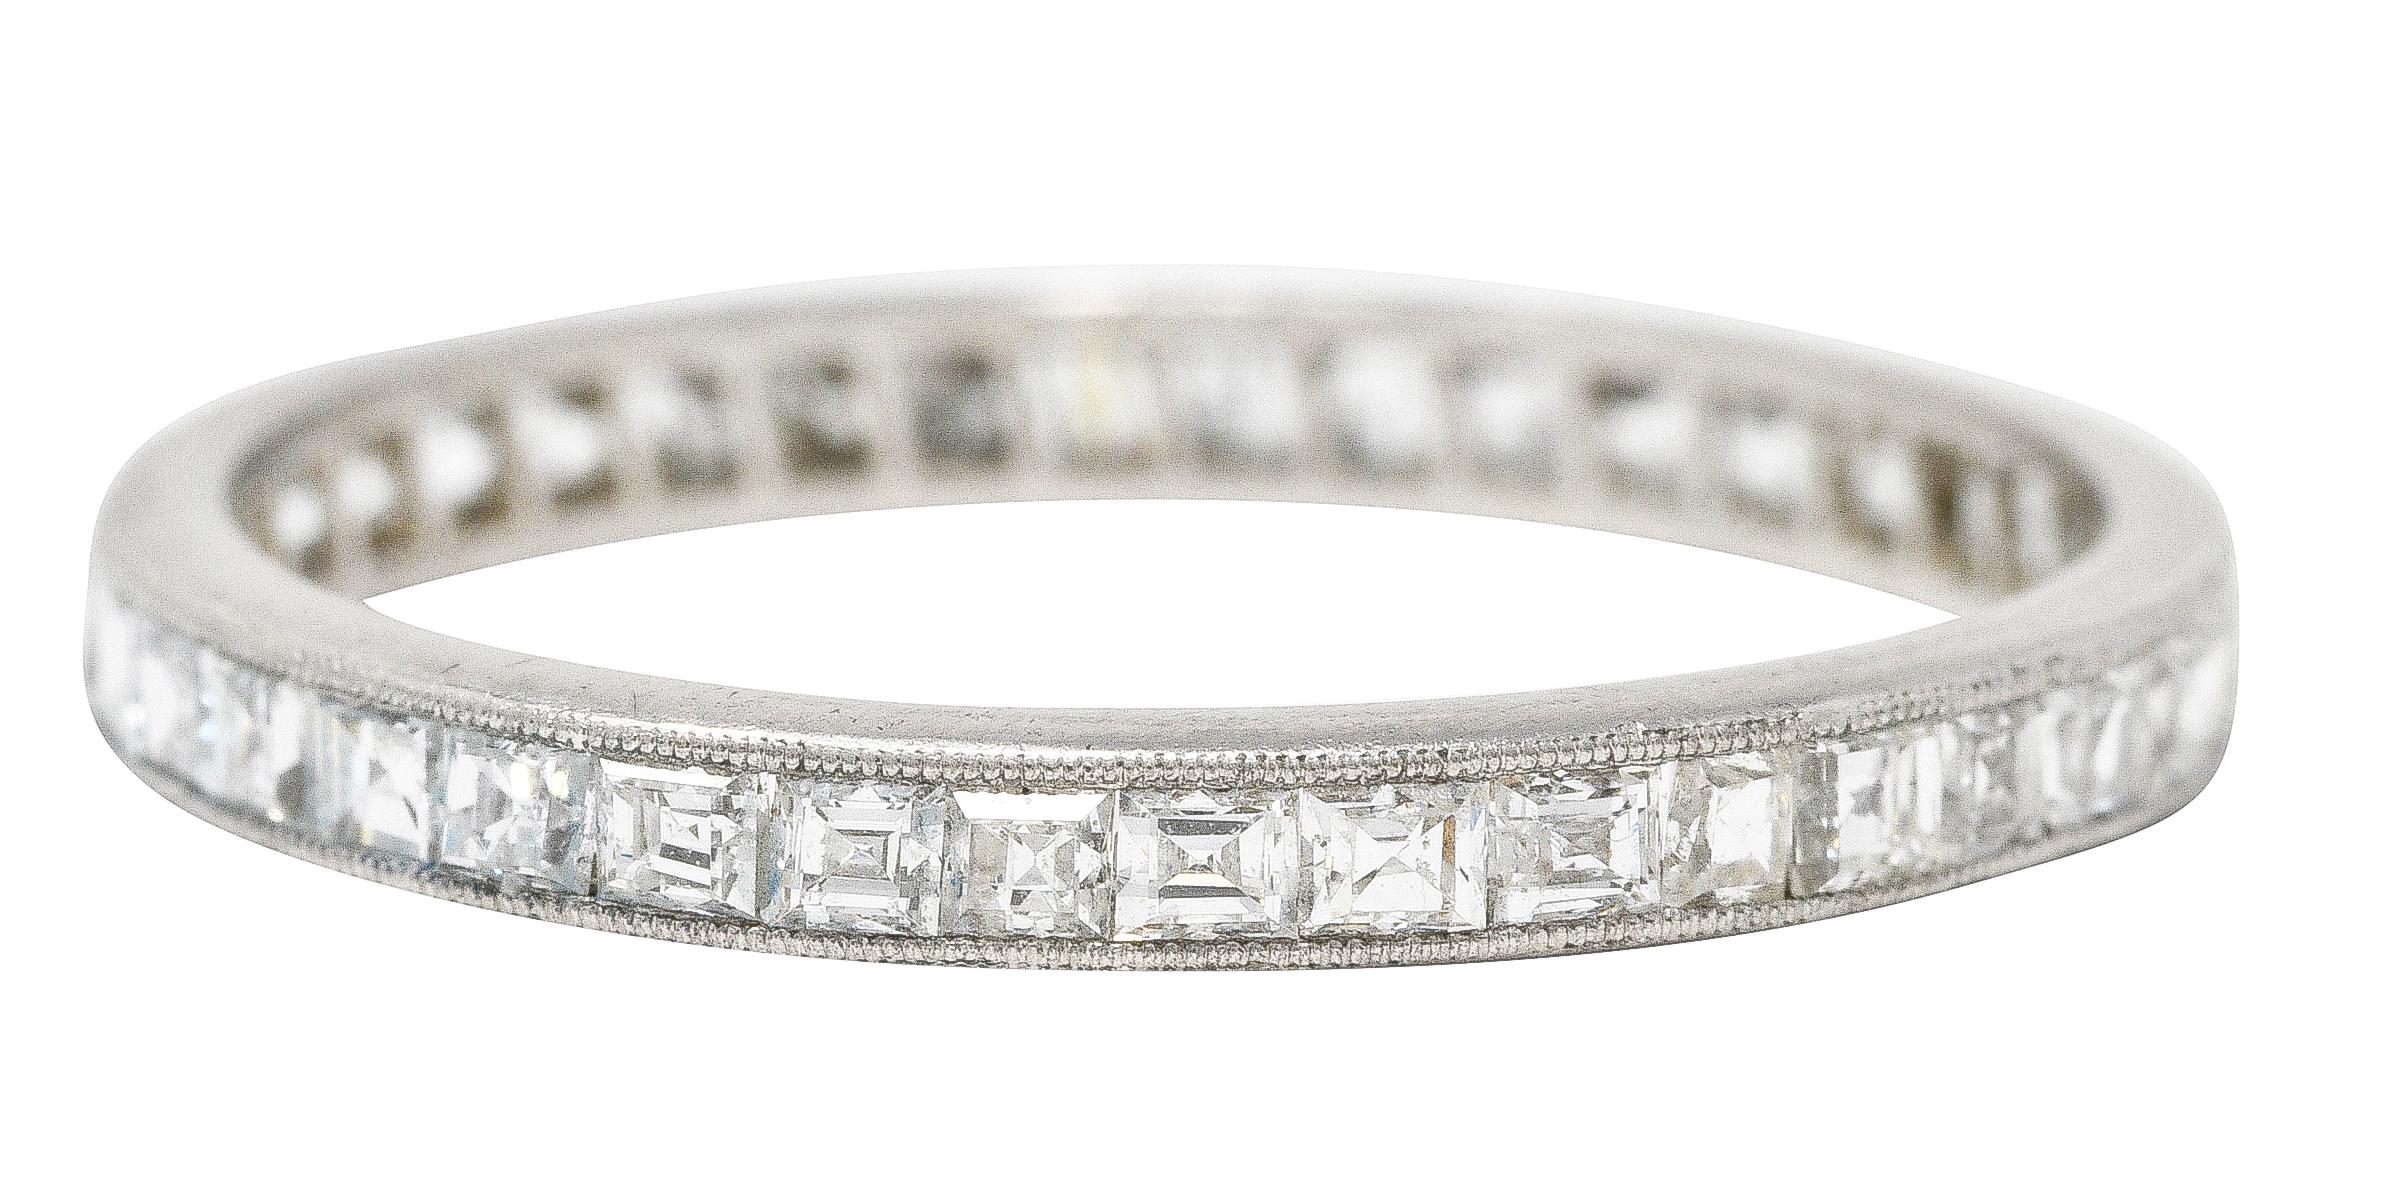 Band ring features square step cut diamonds channel set to front. Weighing approximately 1.00 carat total - F/G in color with VS1 clarity. With milgrain edge surround. Tested as platinum. Circa: 1950's. Ring size: 7 1/2 and not sizable. Measures: